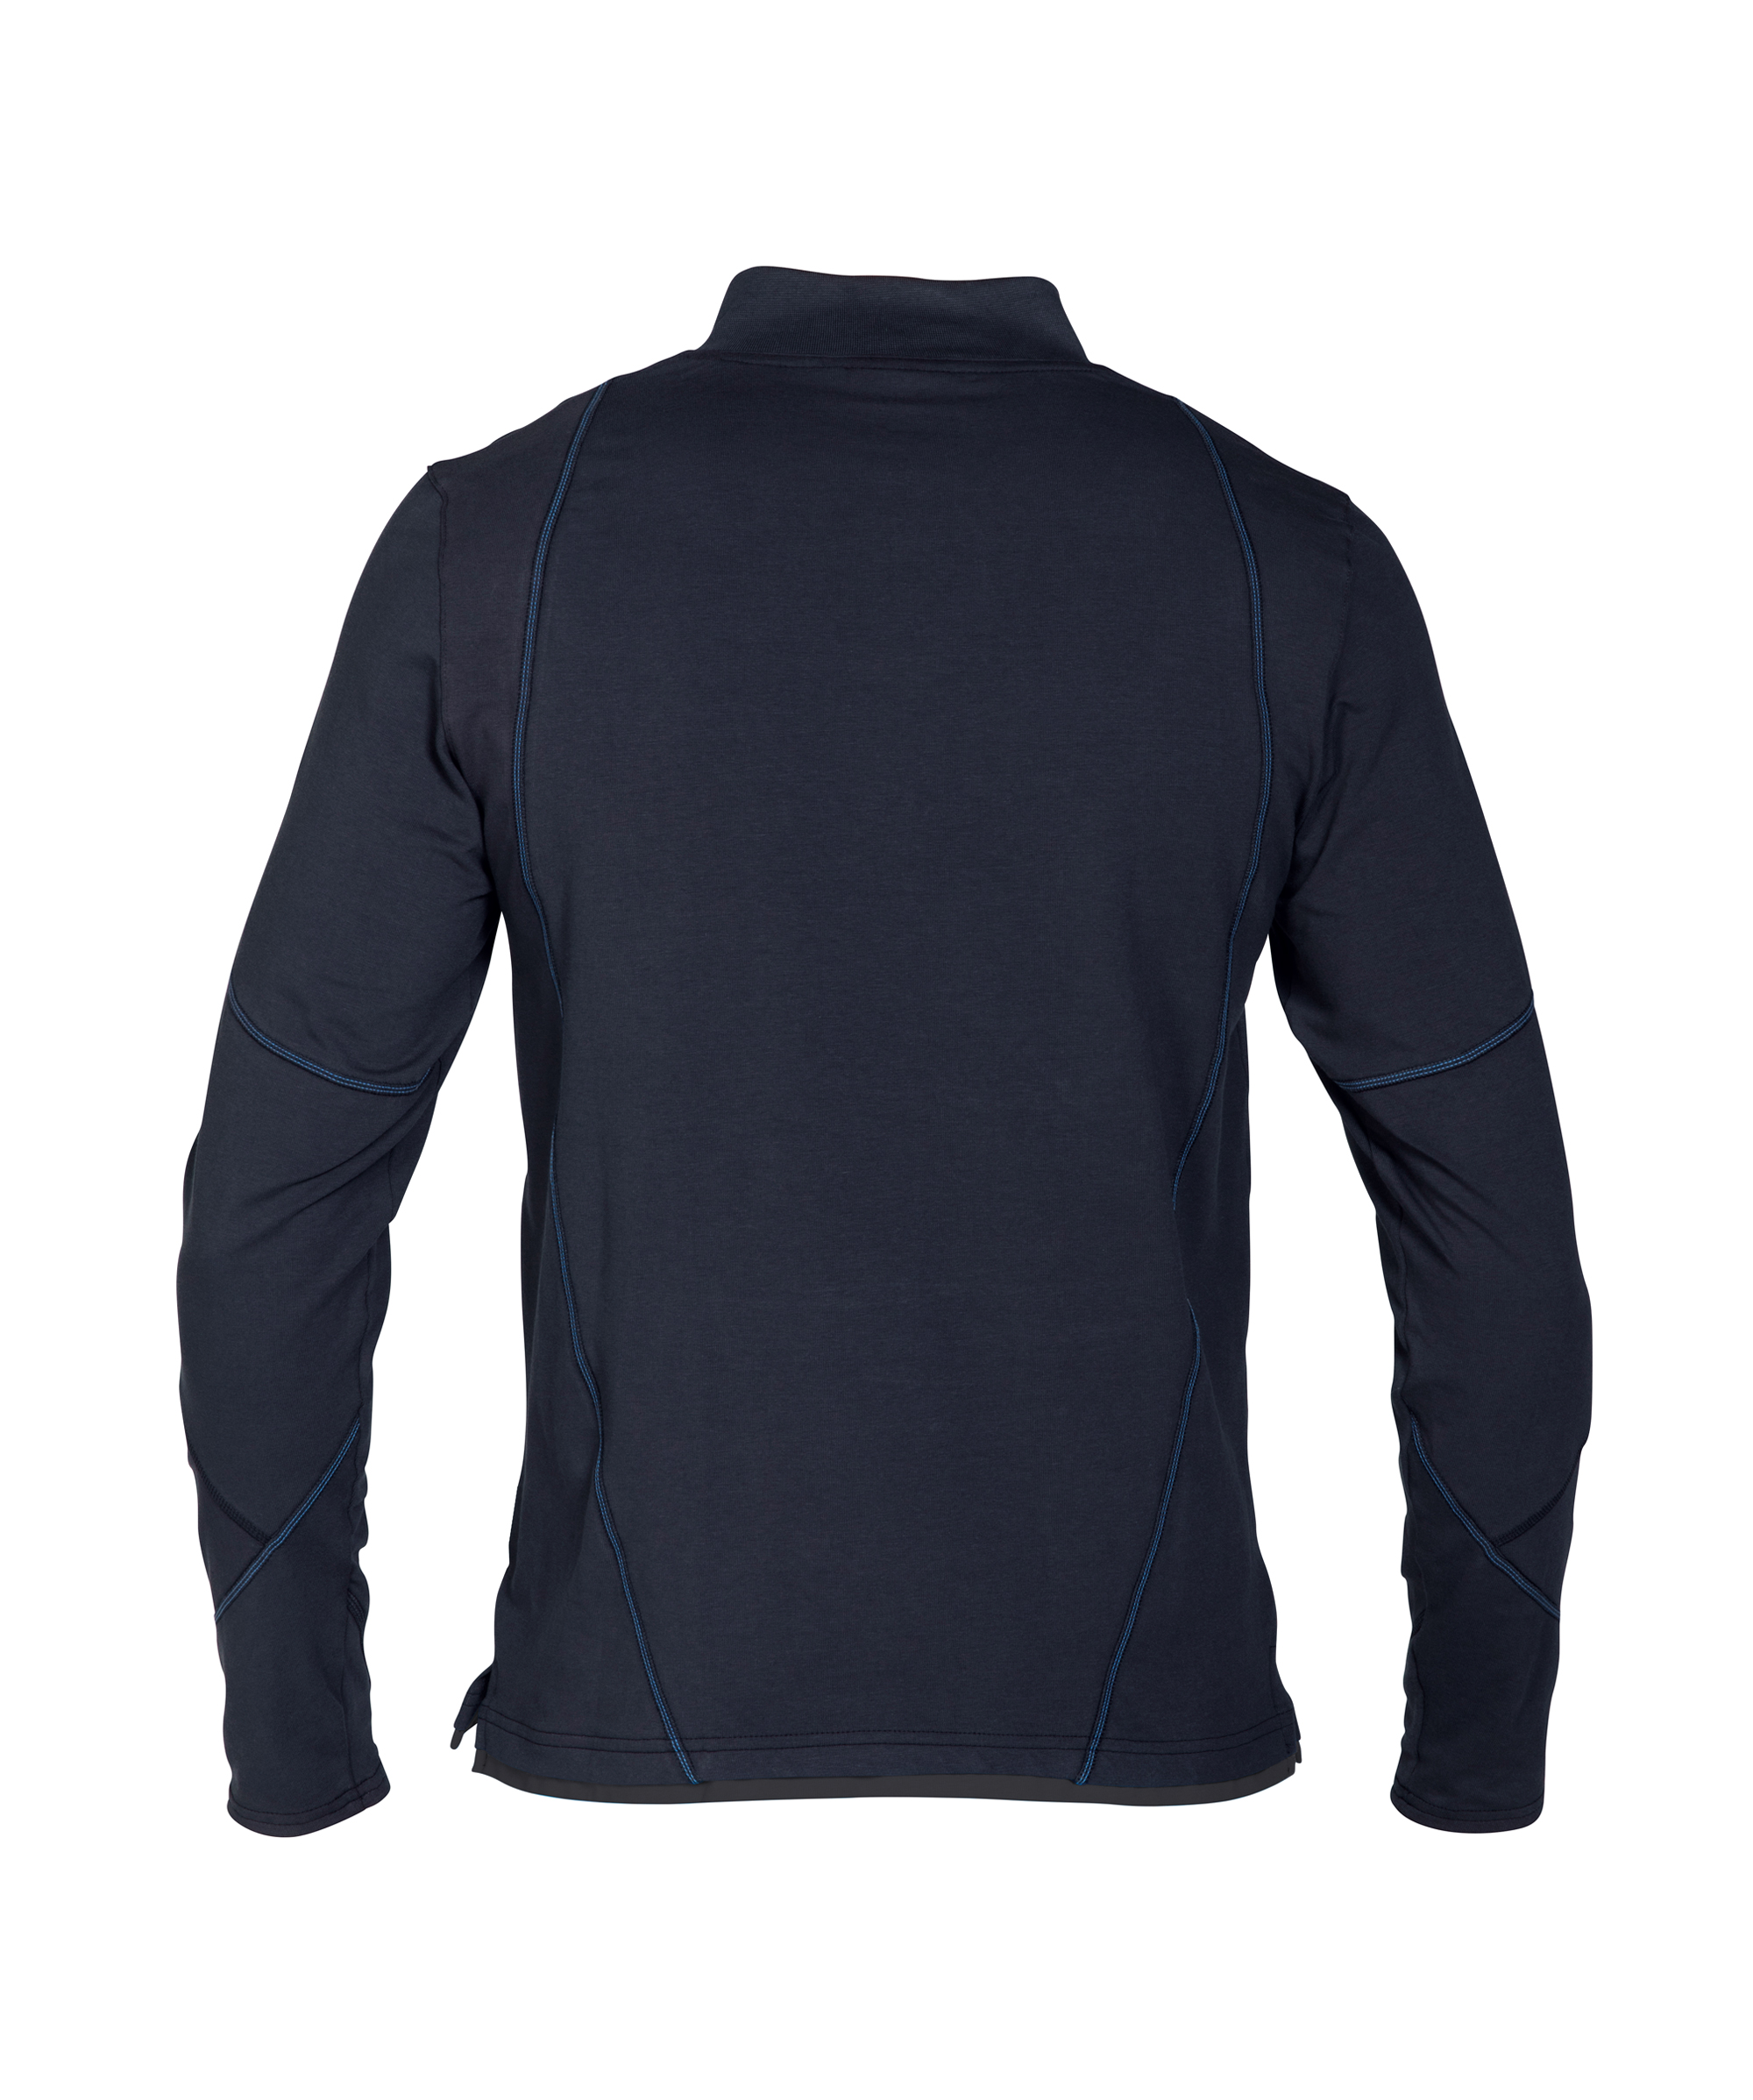 sonic_t-shirt-with-long-sleeves_midnight-blue-anthracite-grey_back.jpg